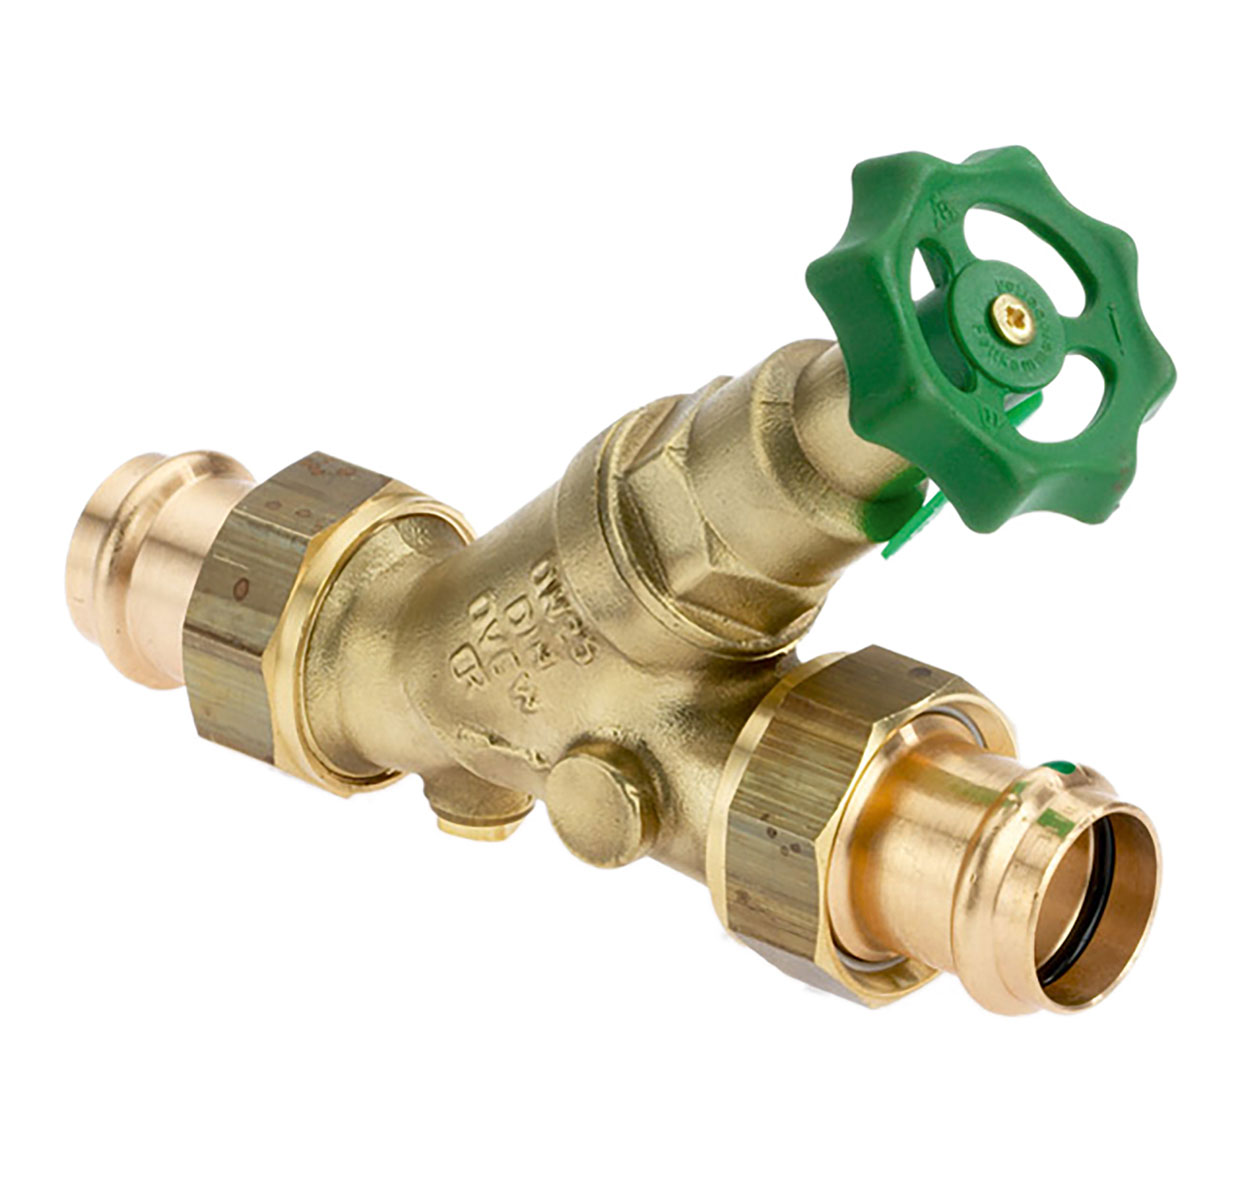 1630350 - CR-Brass Combined Free-flow and Backflow-preventer Valve Viega Profipress, not-rising, without drain valve